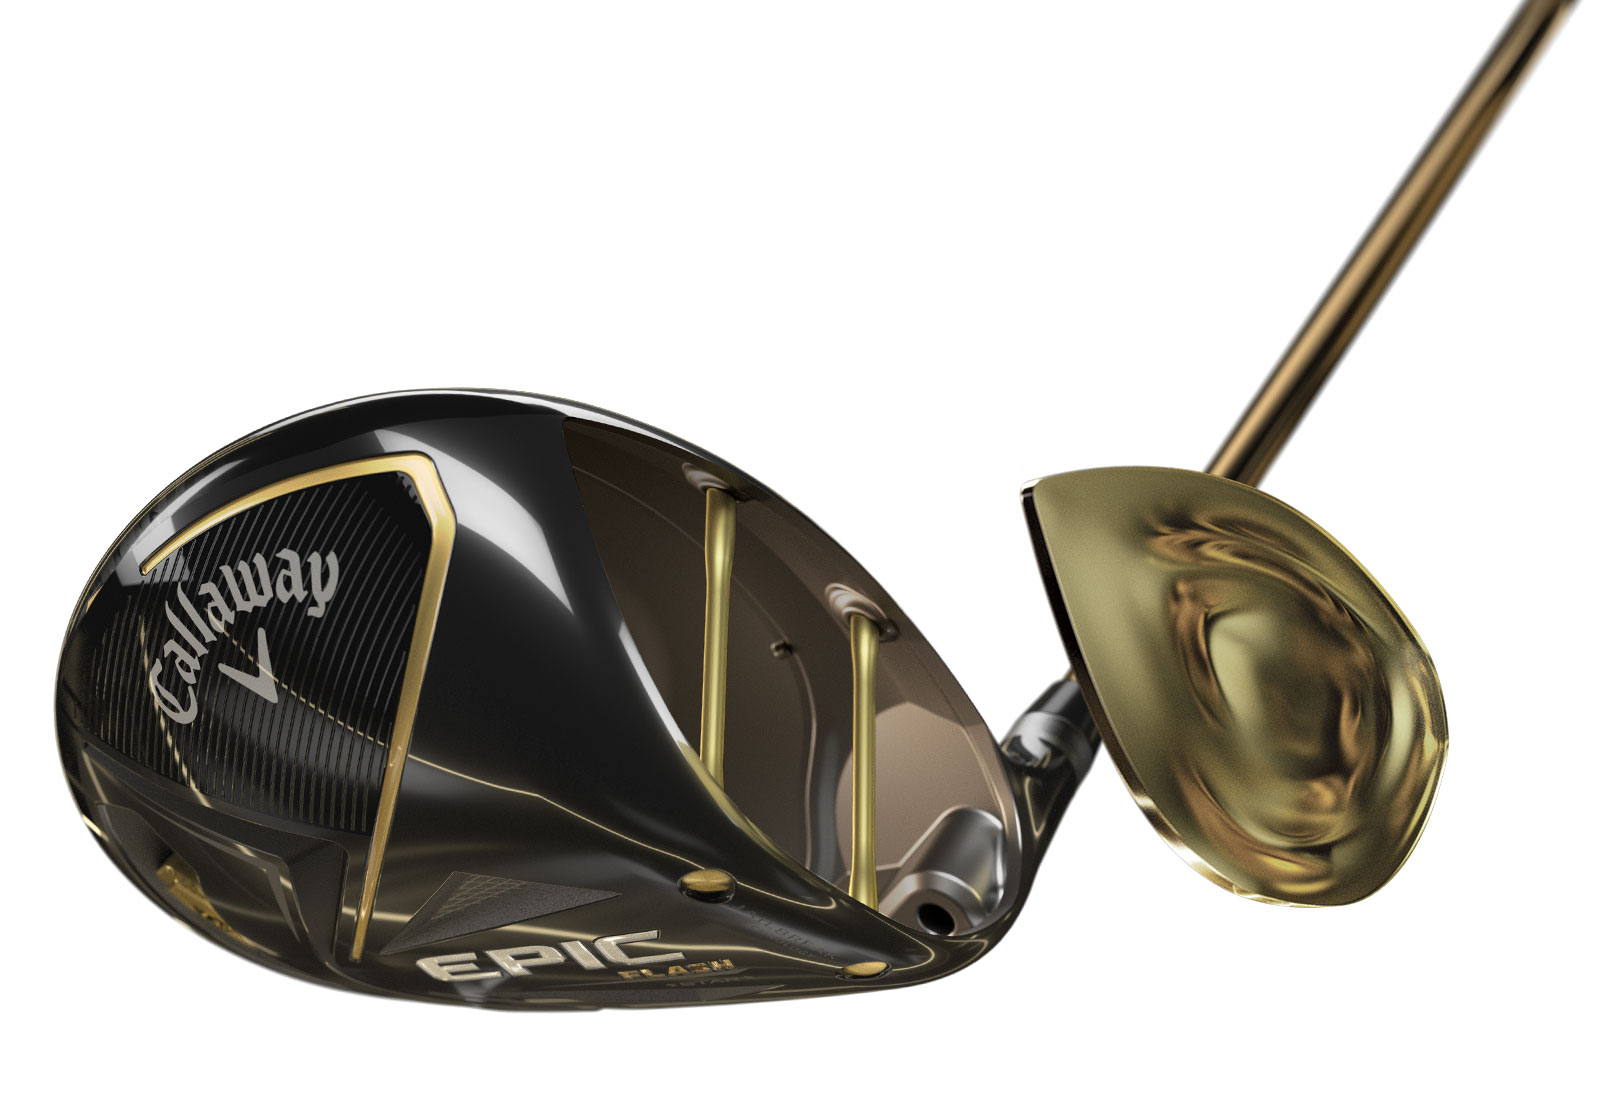 Callaway EPIC Flash Star product image from the back for feature section